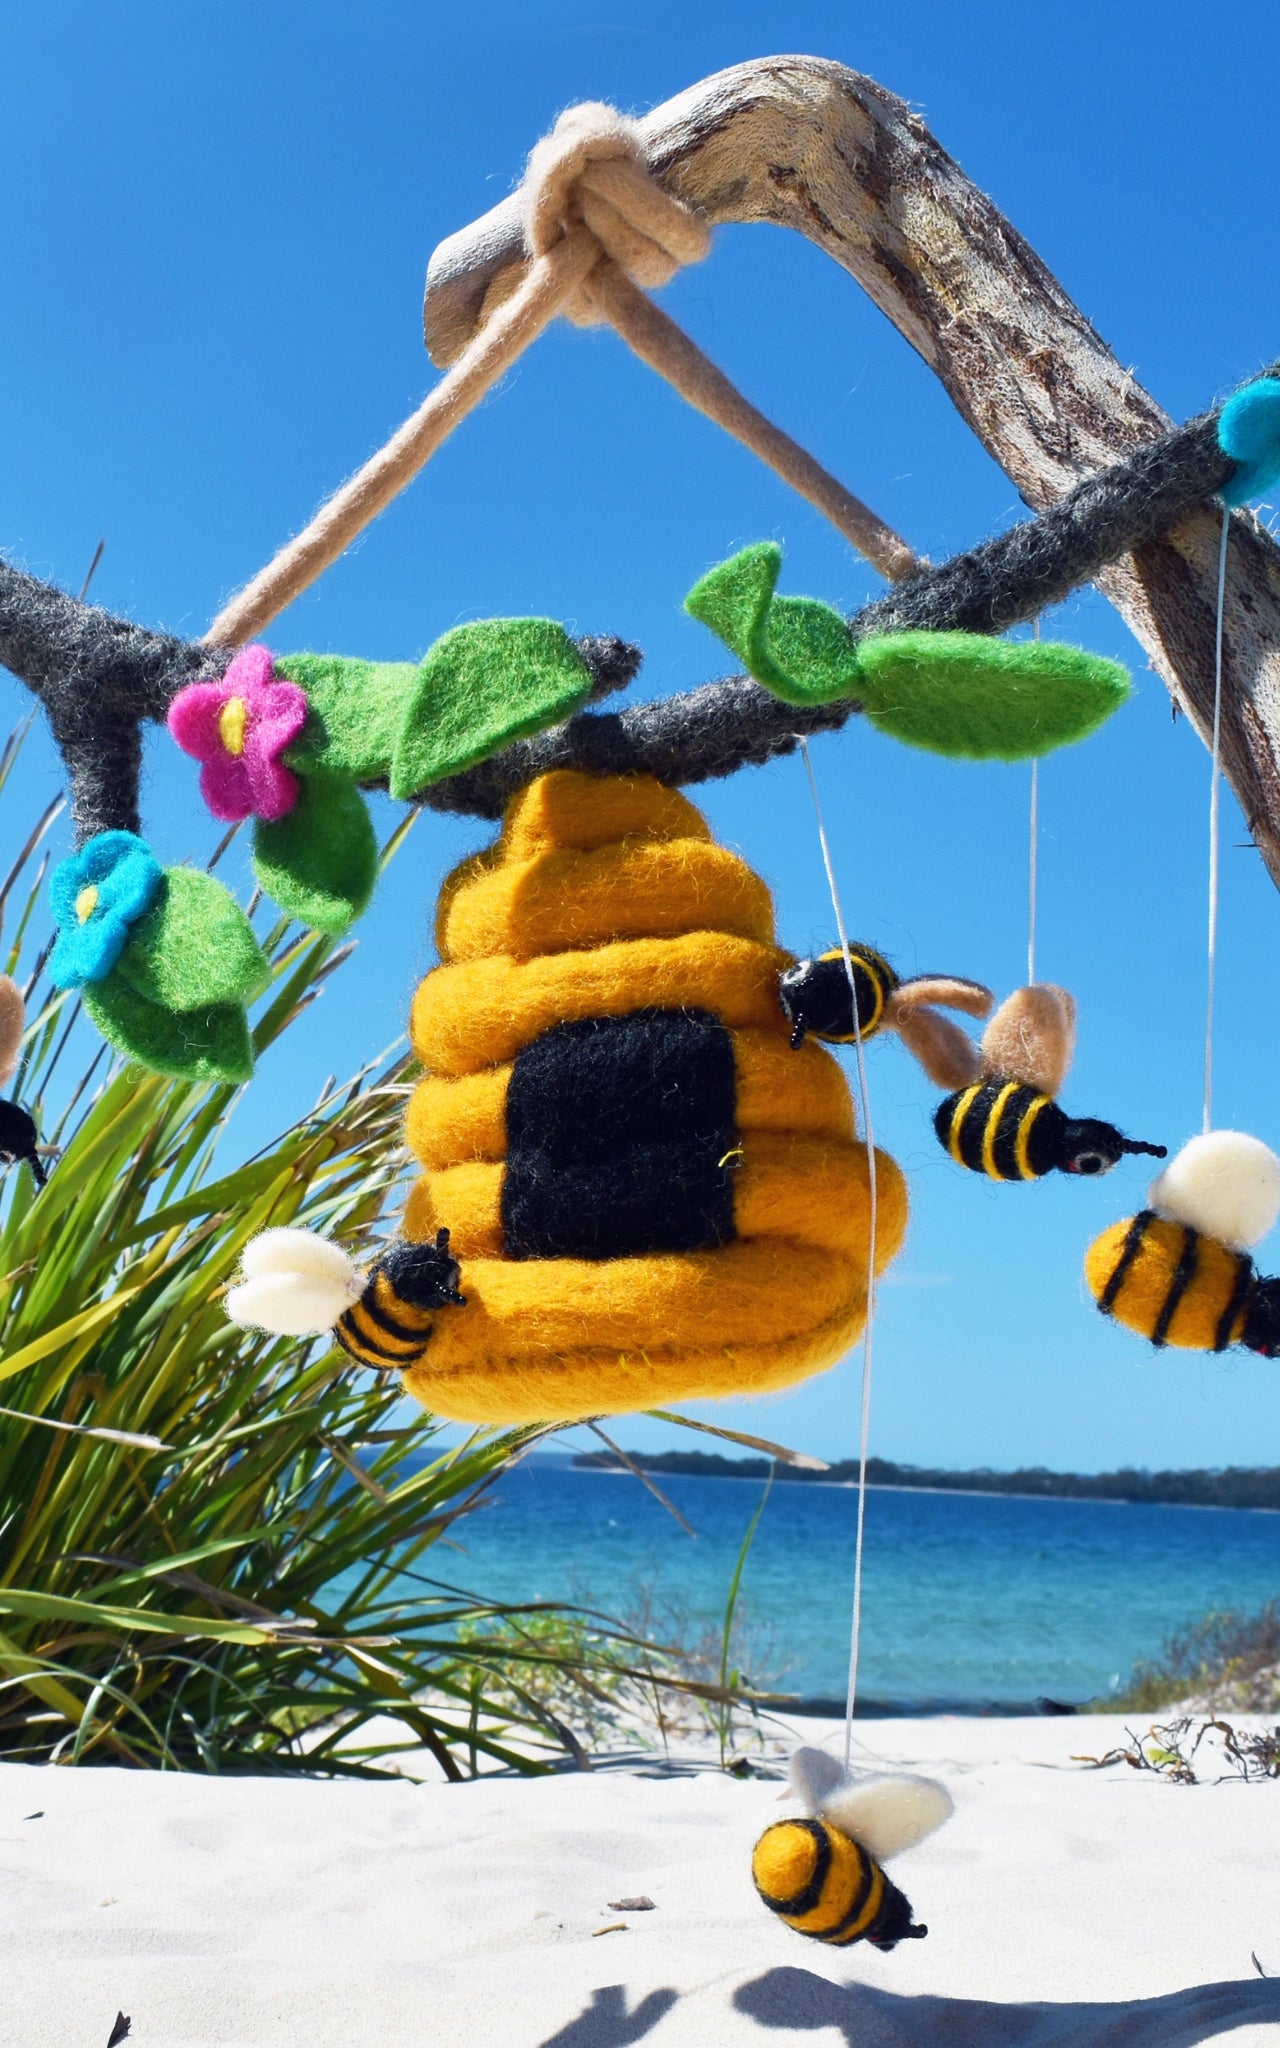 Felt Bee Hive from Nepal - Surya Australia Ethical Trade with Nepal